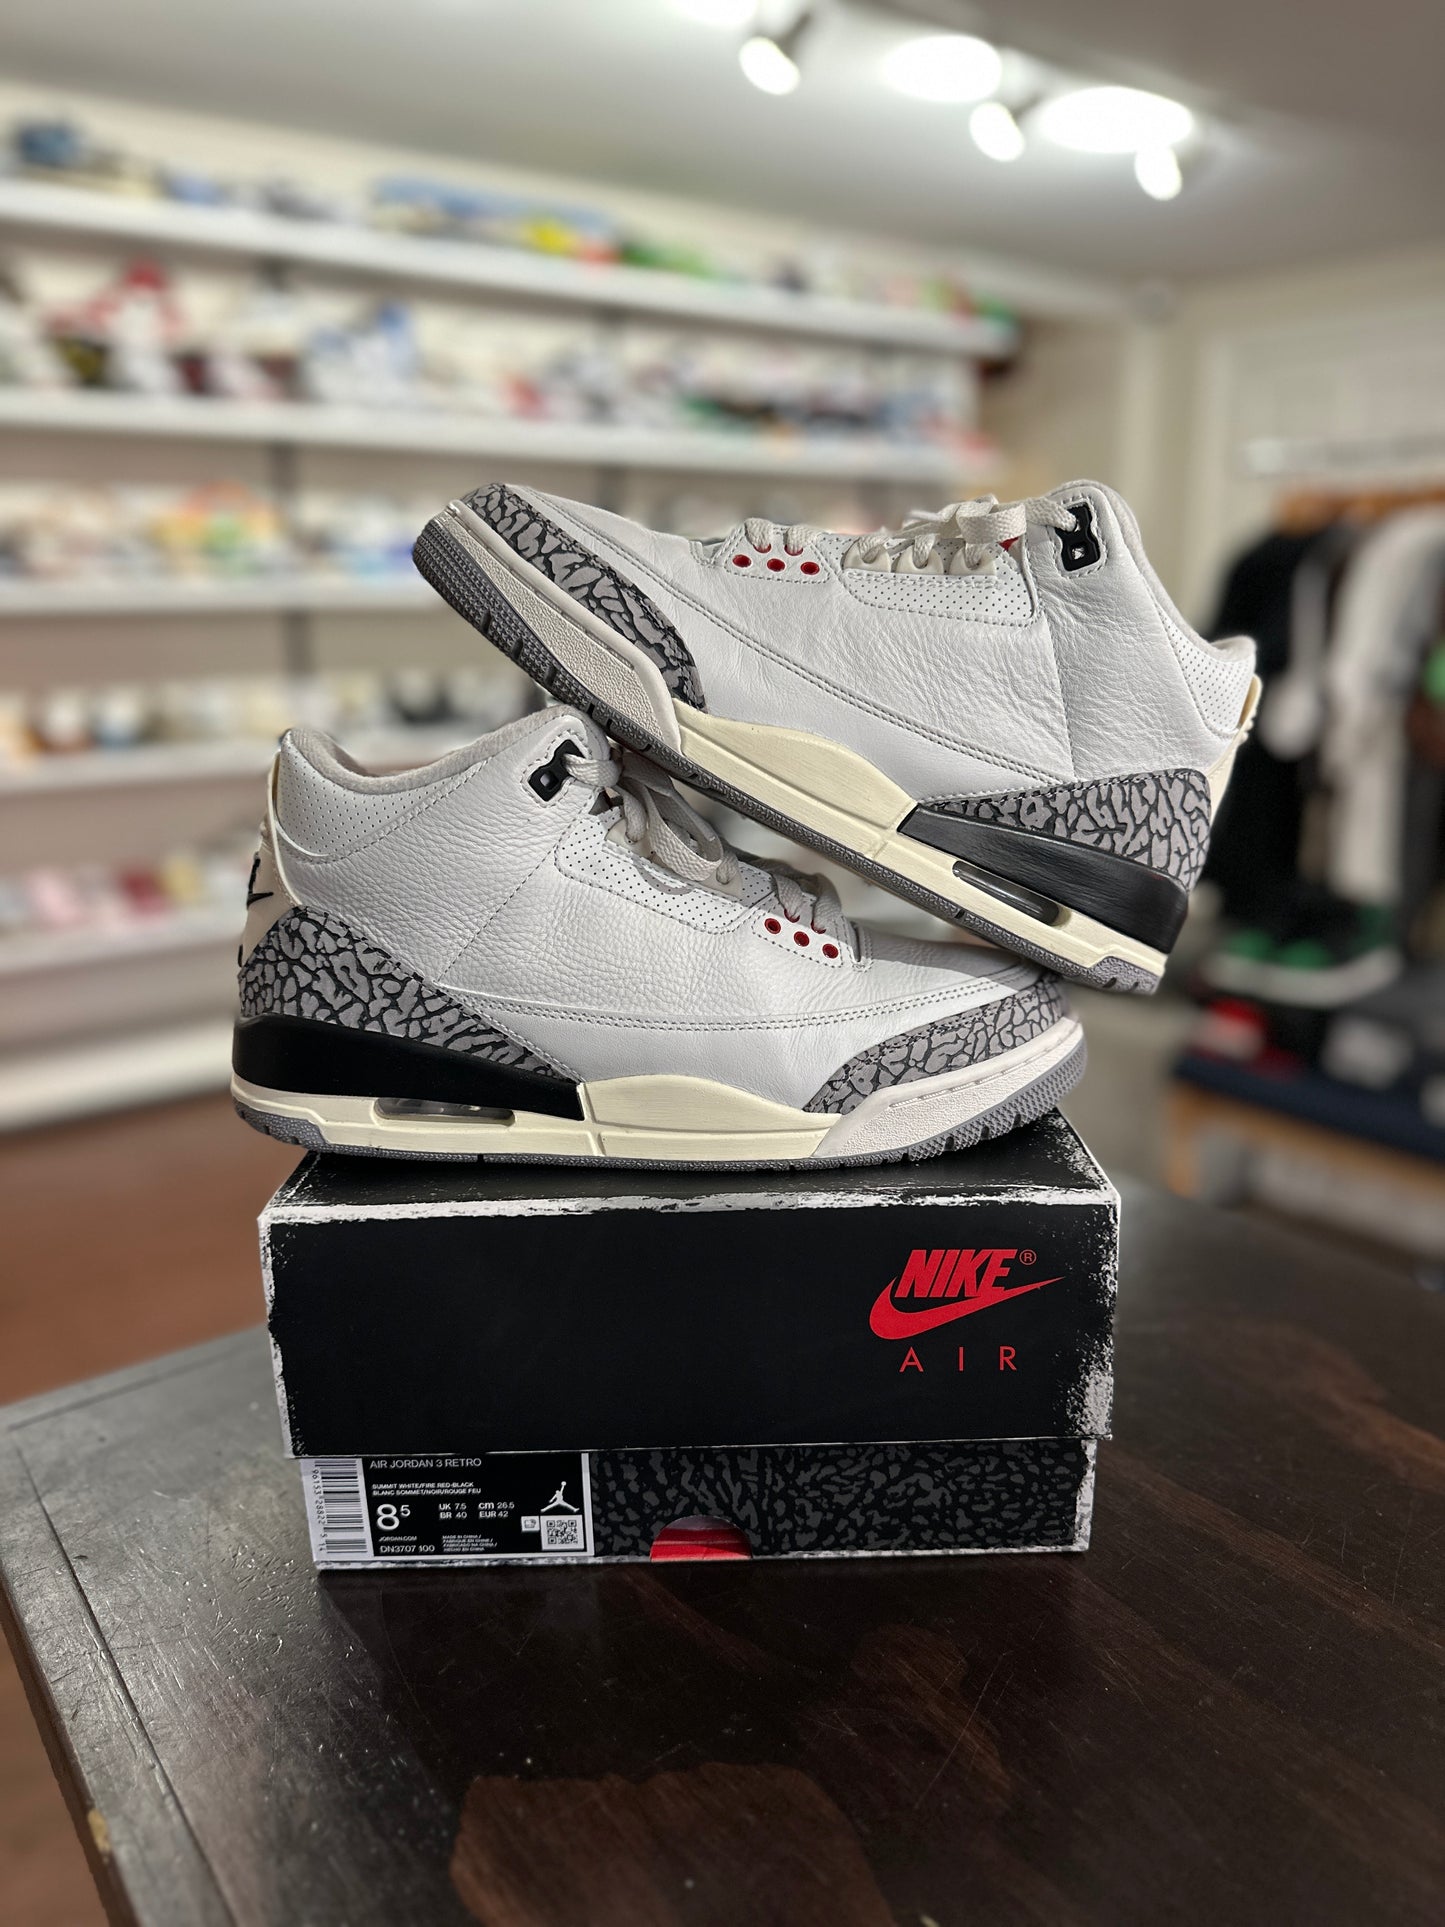 *USED* Air Jordan 3 Reimagined White Cement (size 8.5)